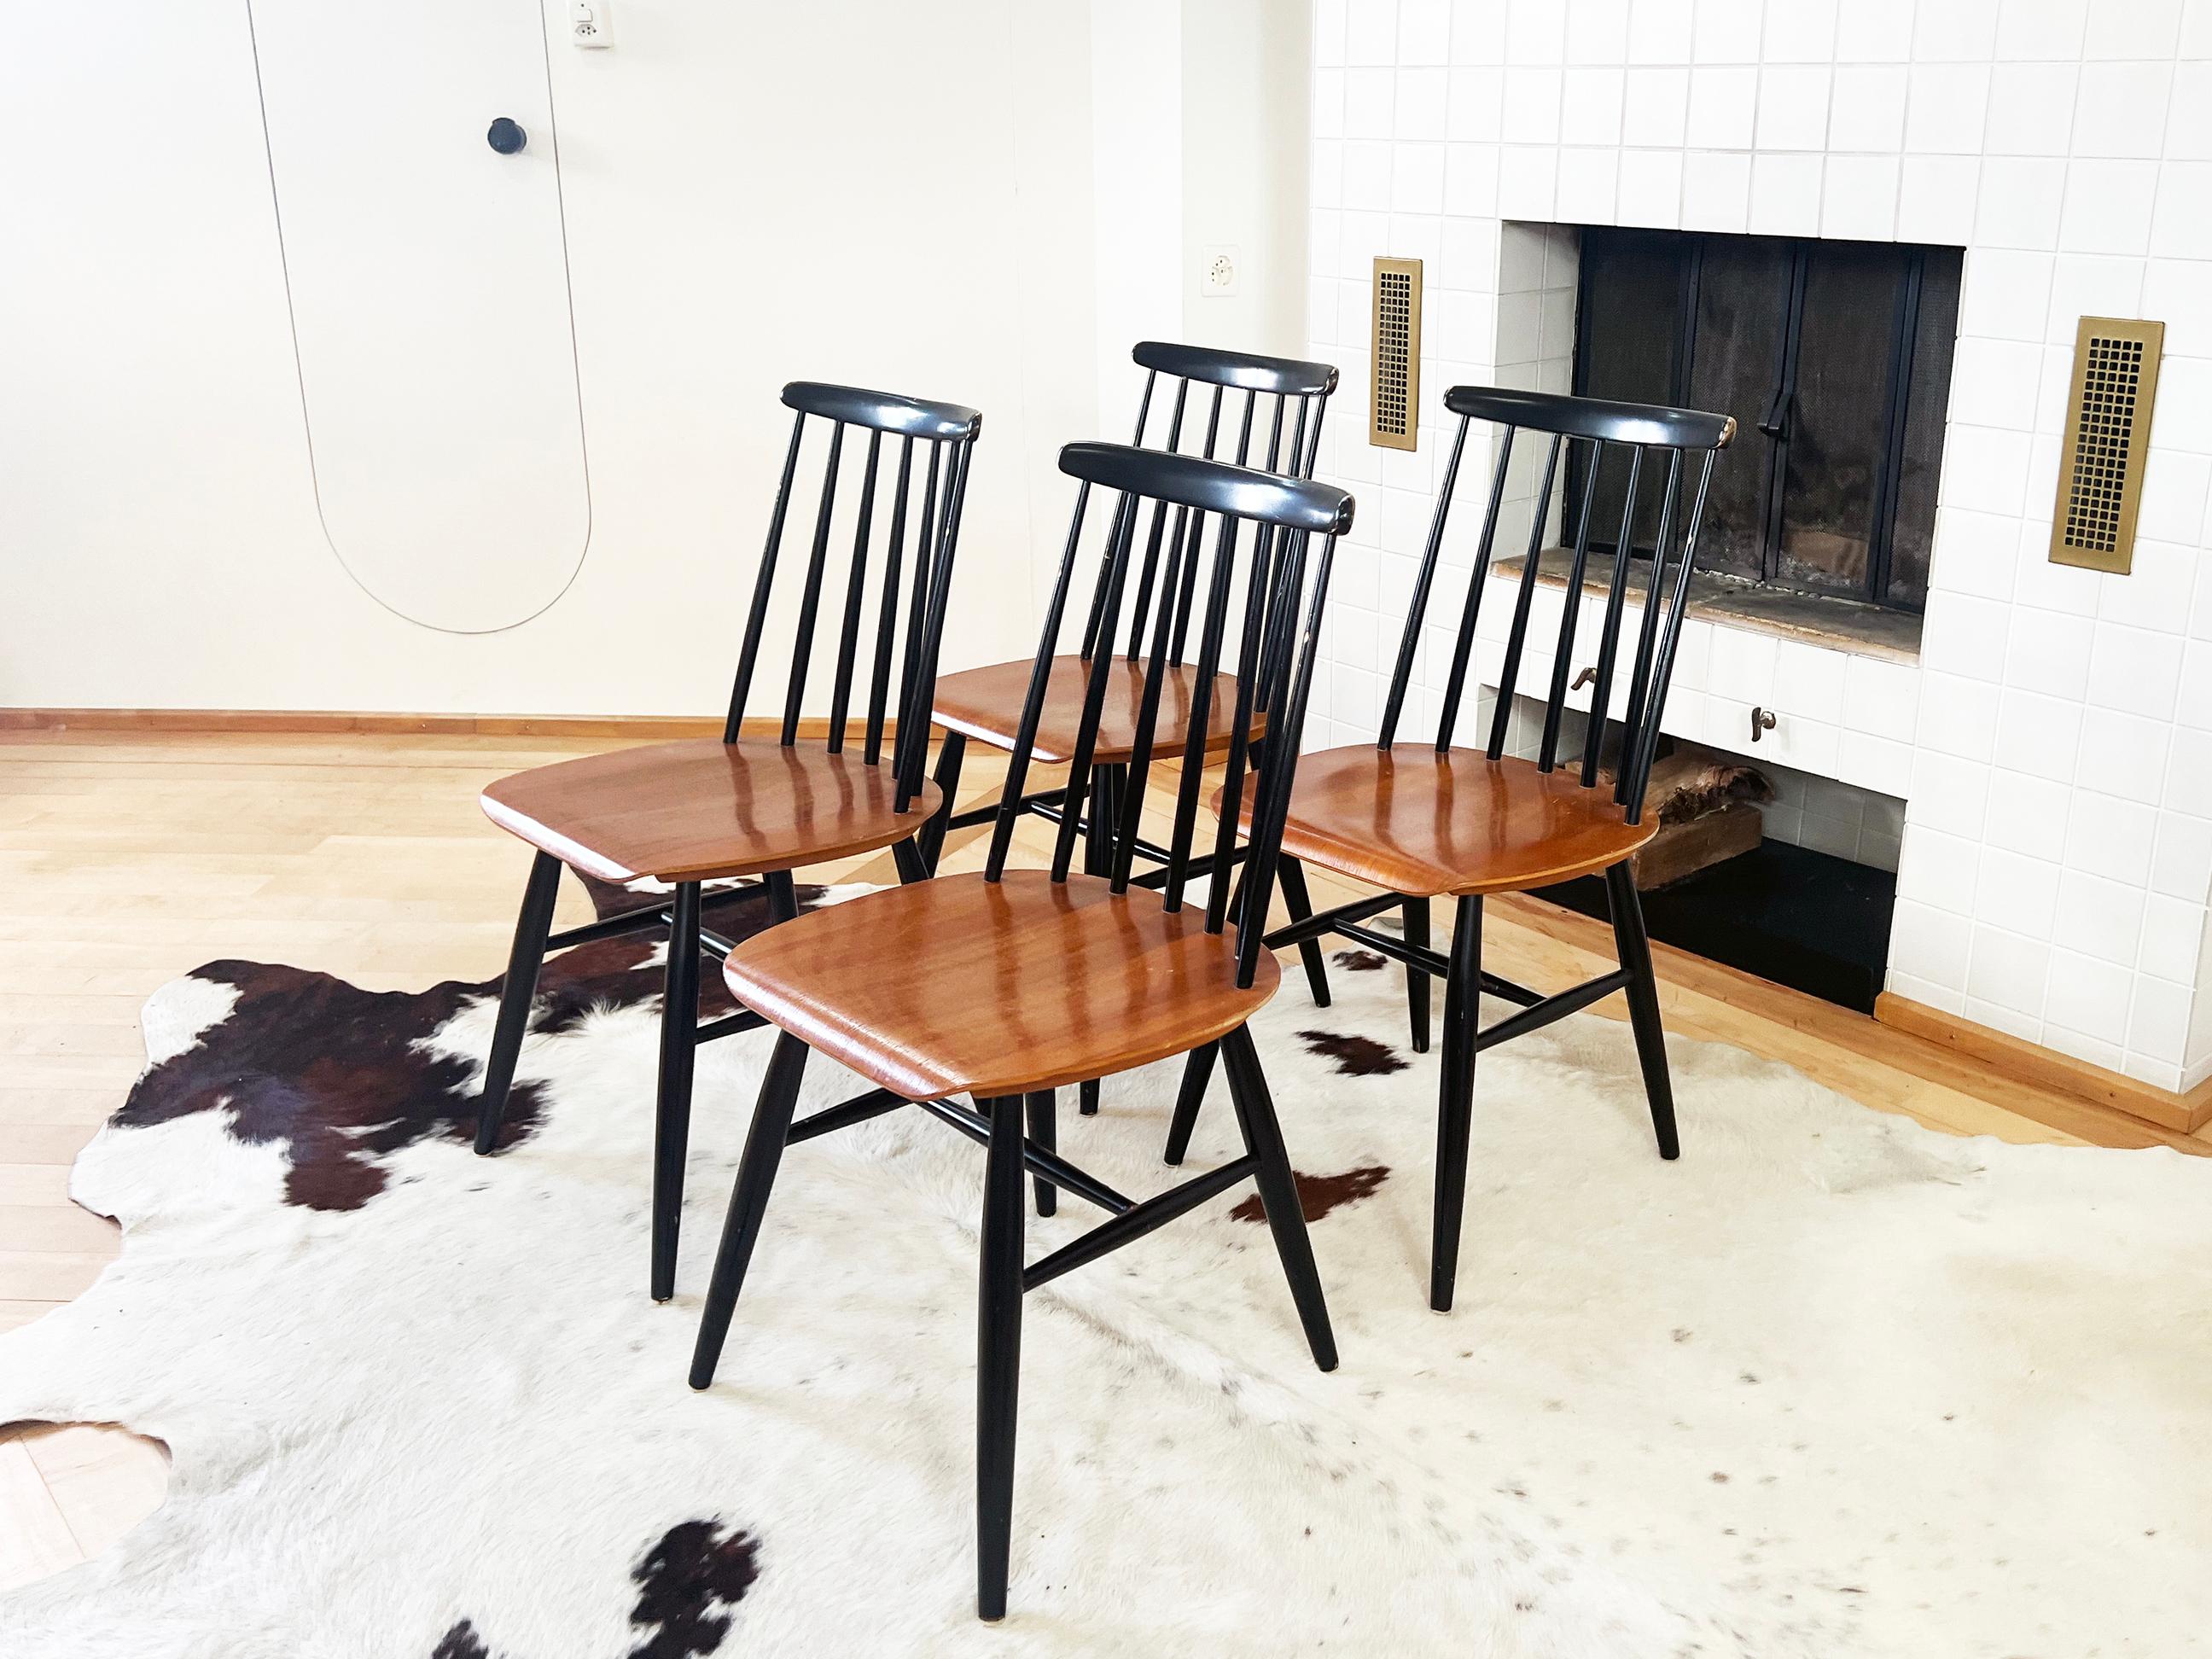 Set of four Fannet dining chairs designed in the 1960s by the Finnish designer Ilmari Tapiovaara.
These feature the RARE curved seated in teak and 7 spindles. Beautiful design.

The chairs are made of black painted wood. The seat is made of solid